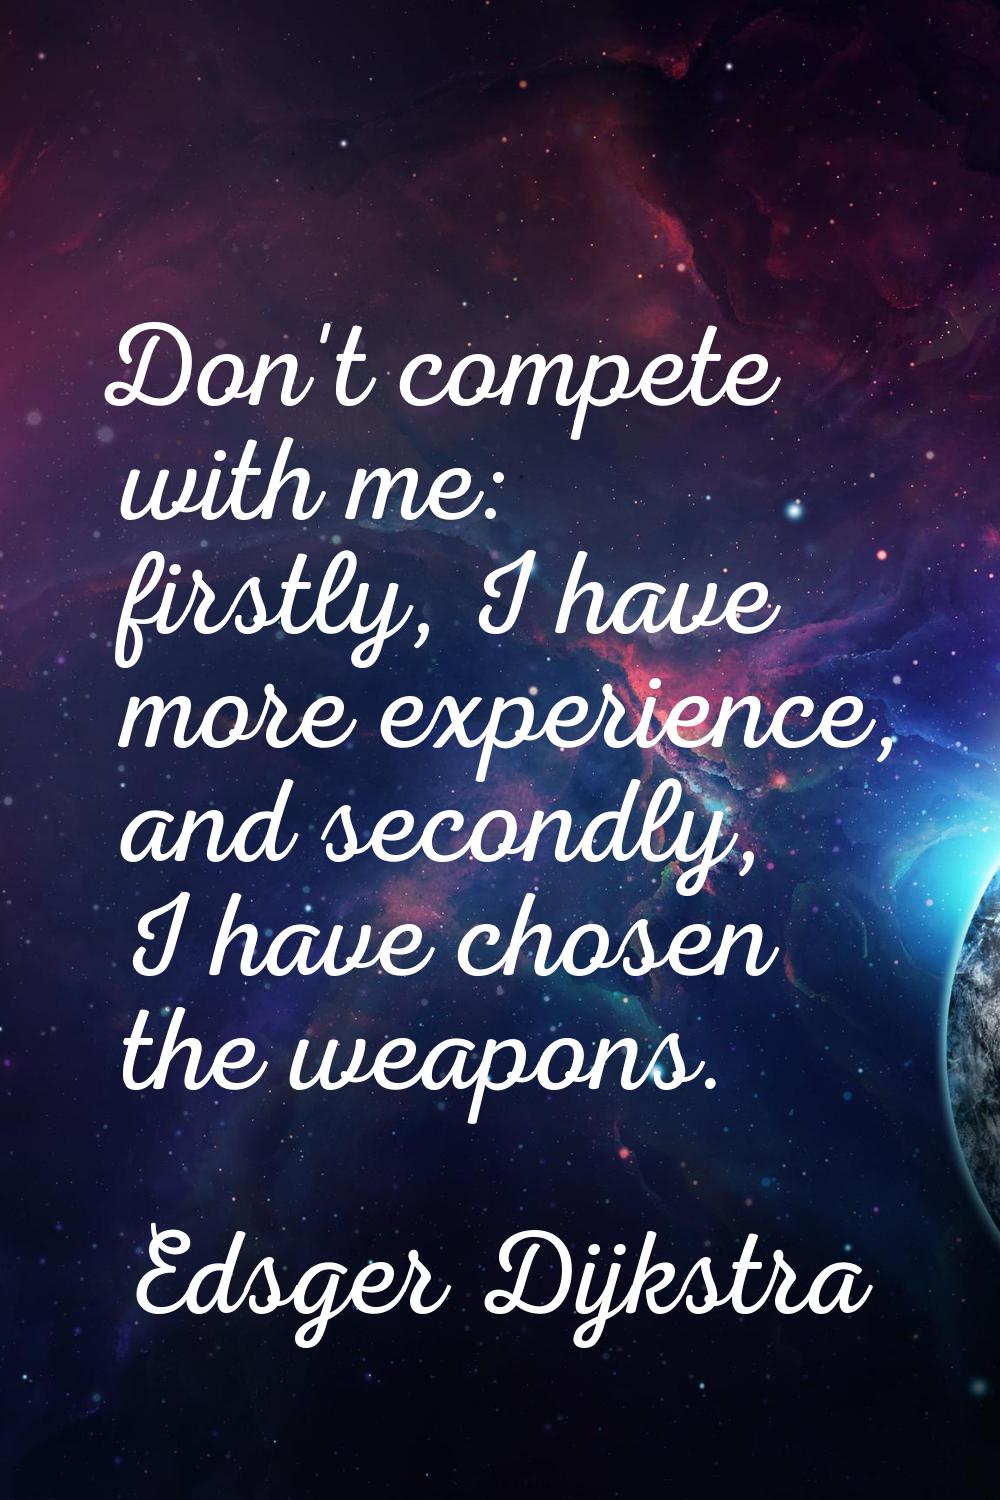 Don't compete with me: firstly, I have more experience, and secondly, I have chosen the weapons.